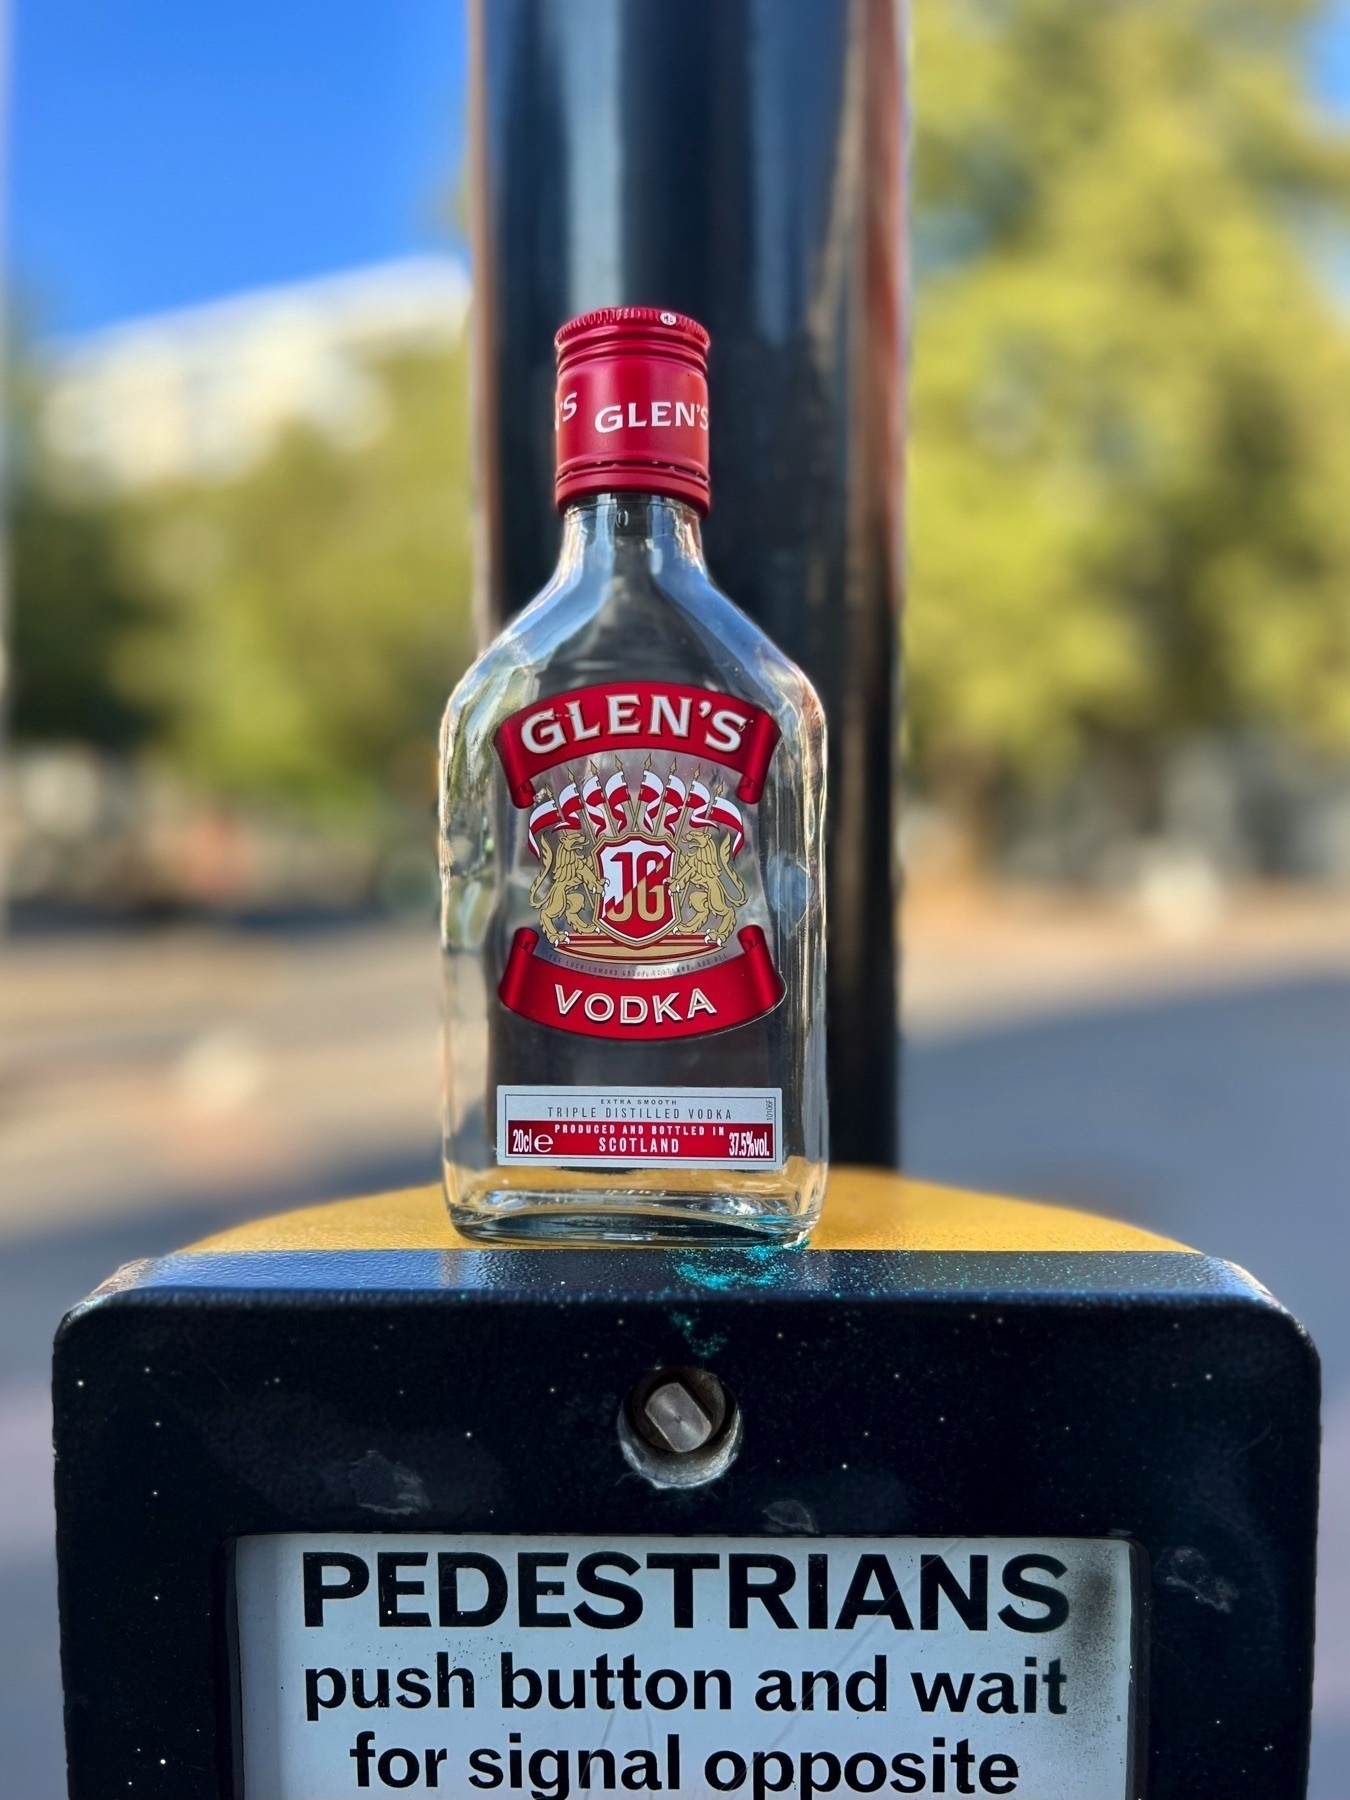 A small bottle of vodka on a pedestrian crossing sign in London. 